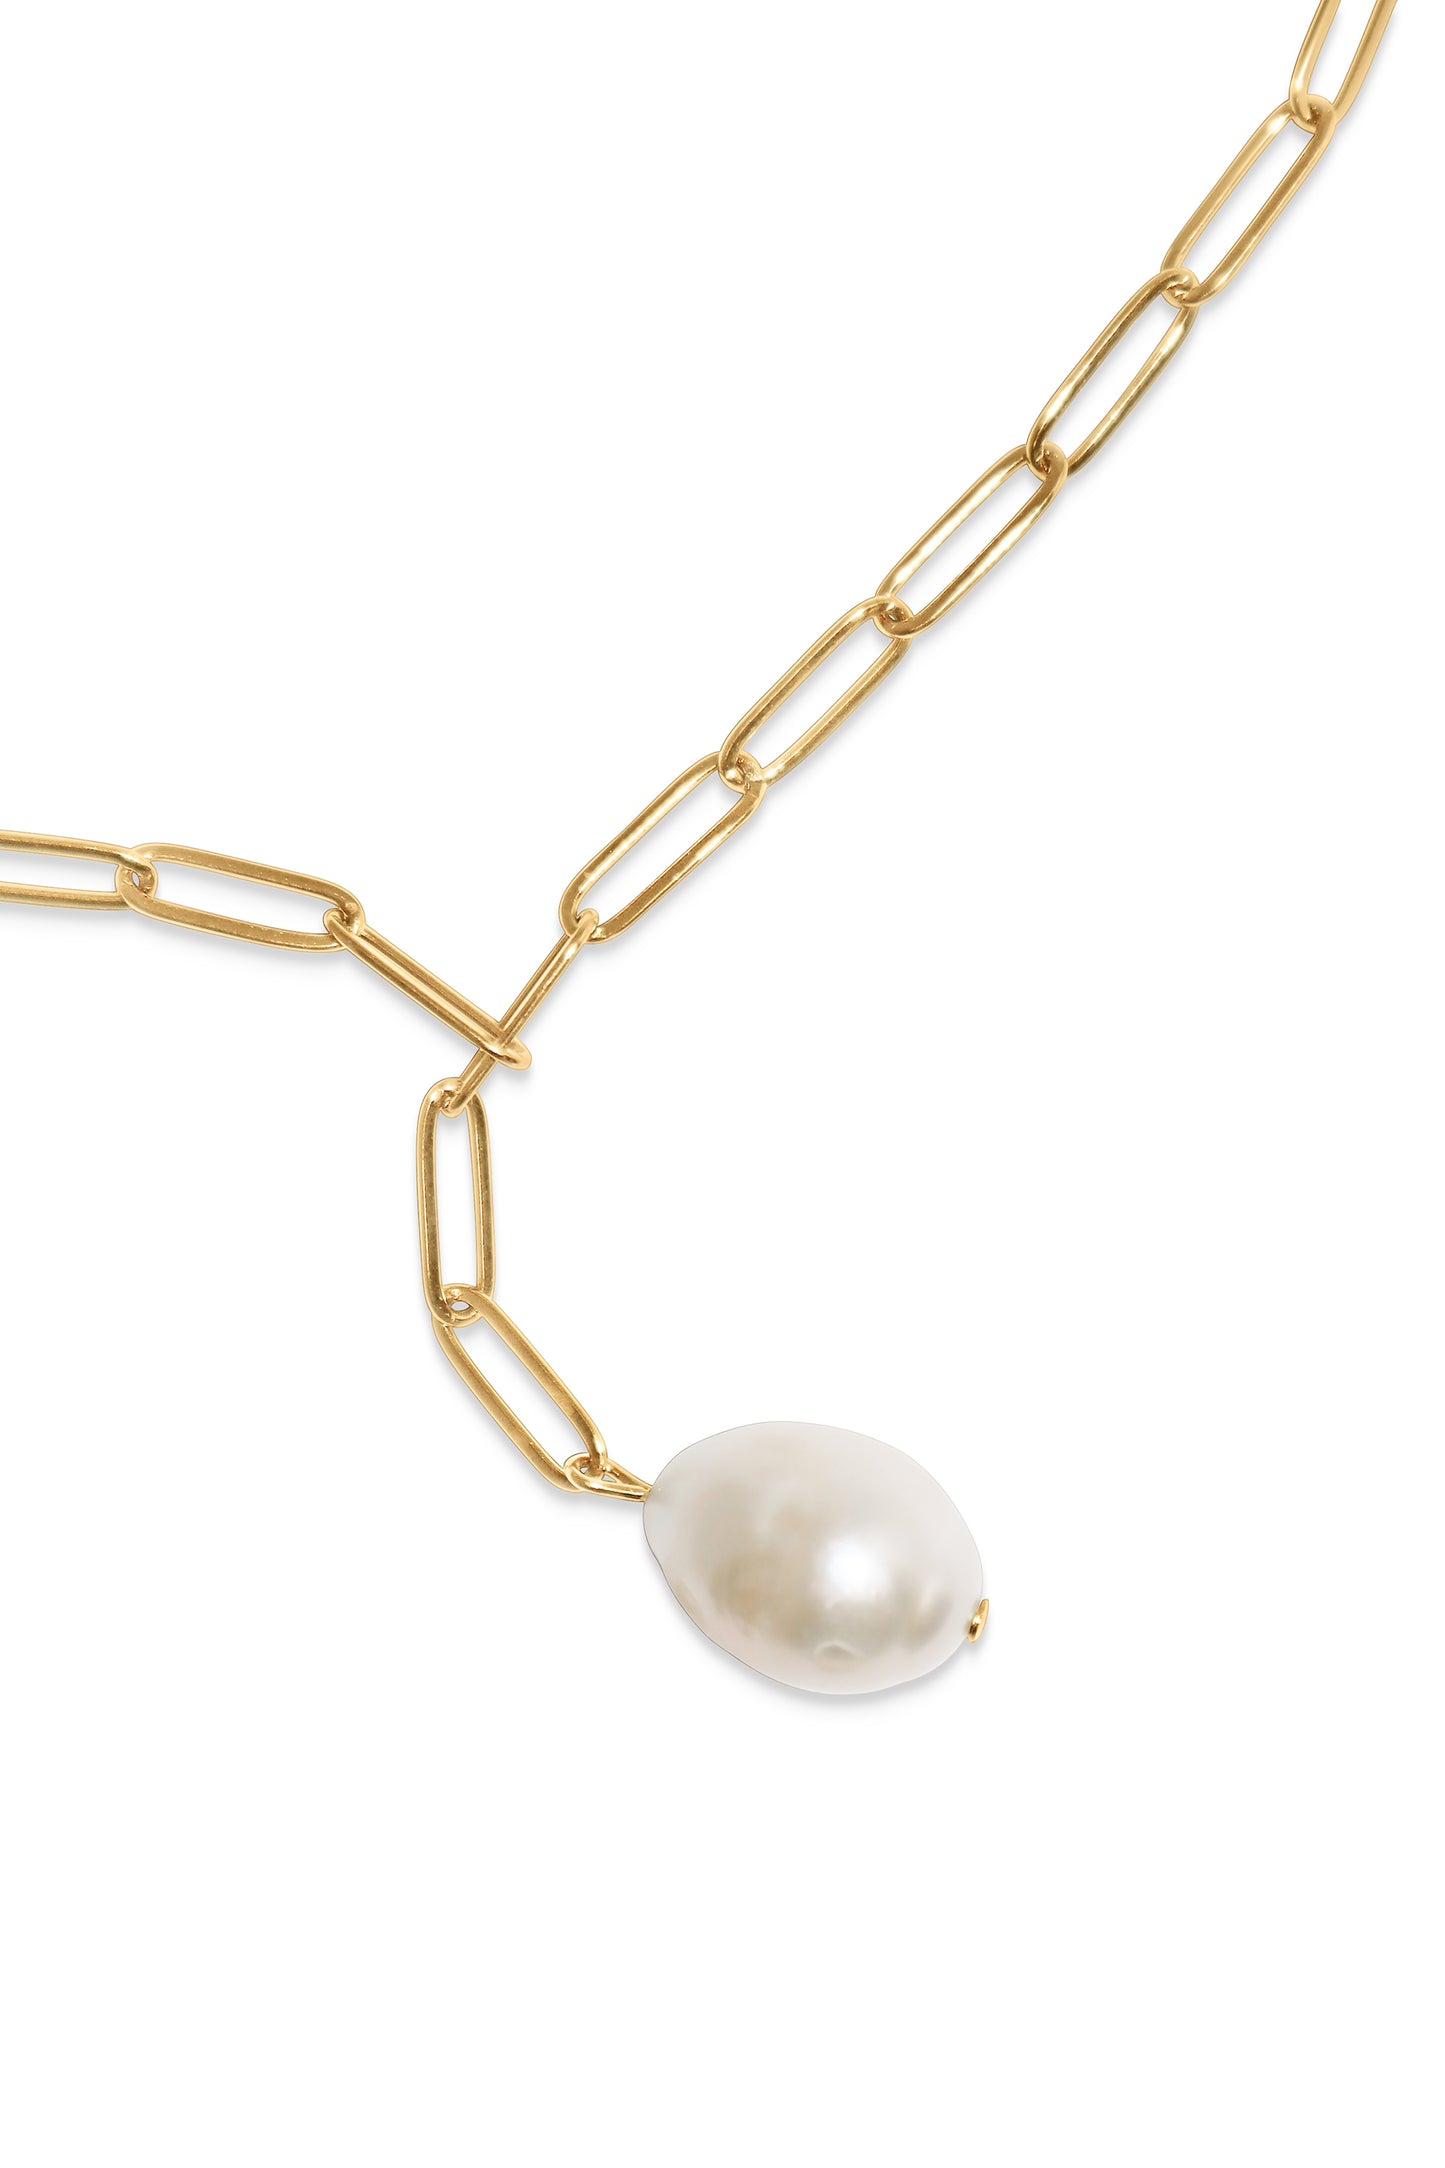 necklace is made from the elongated gold-tone chain links strung with river pearl